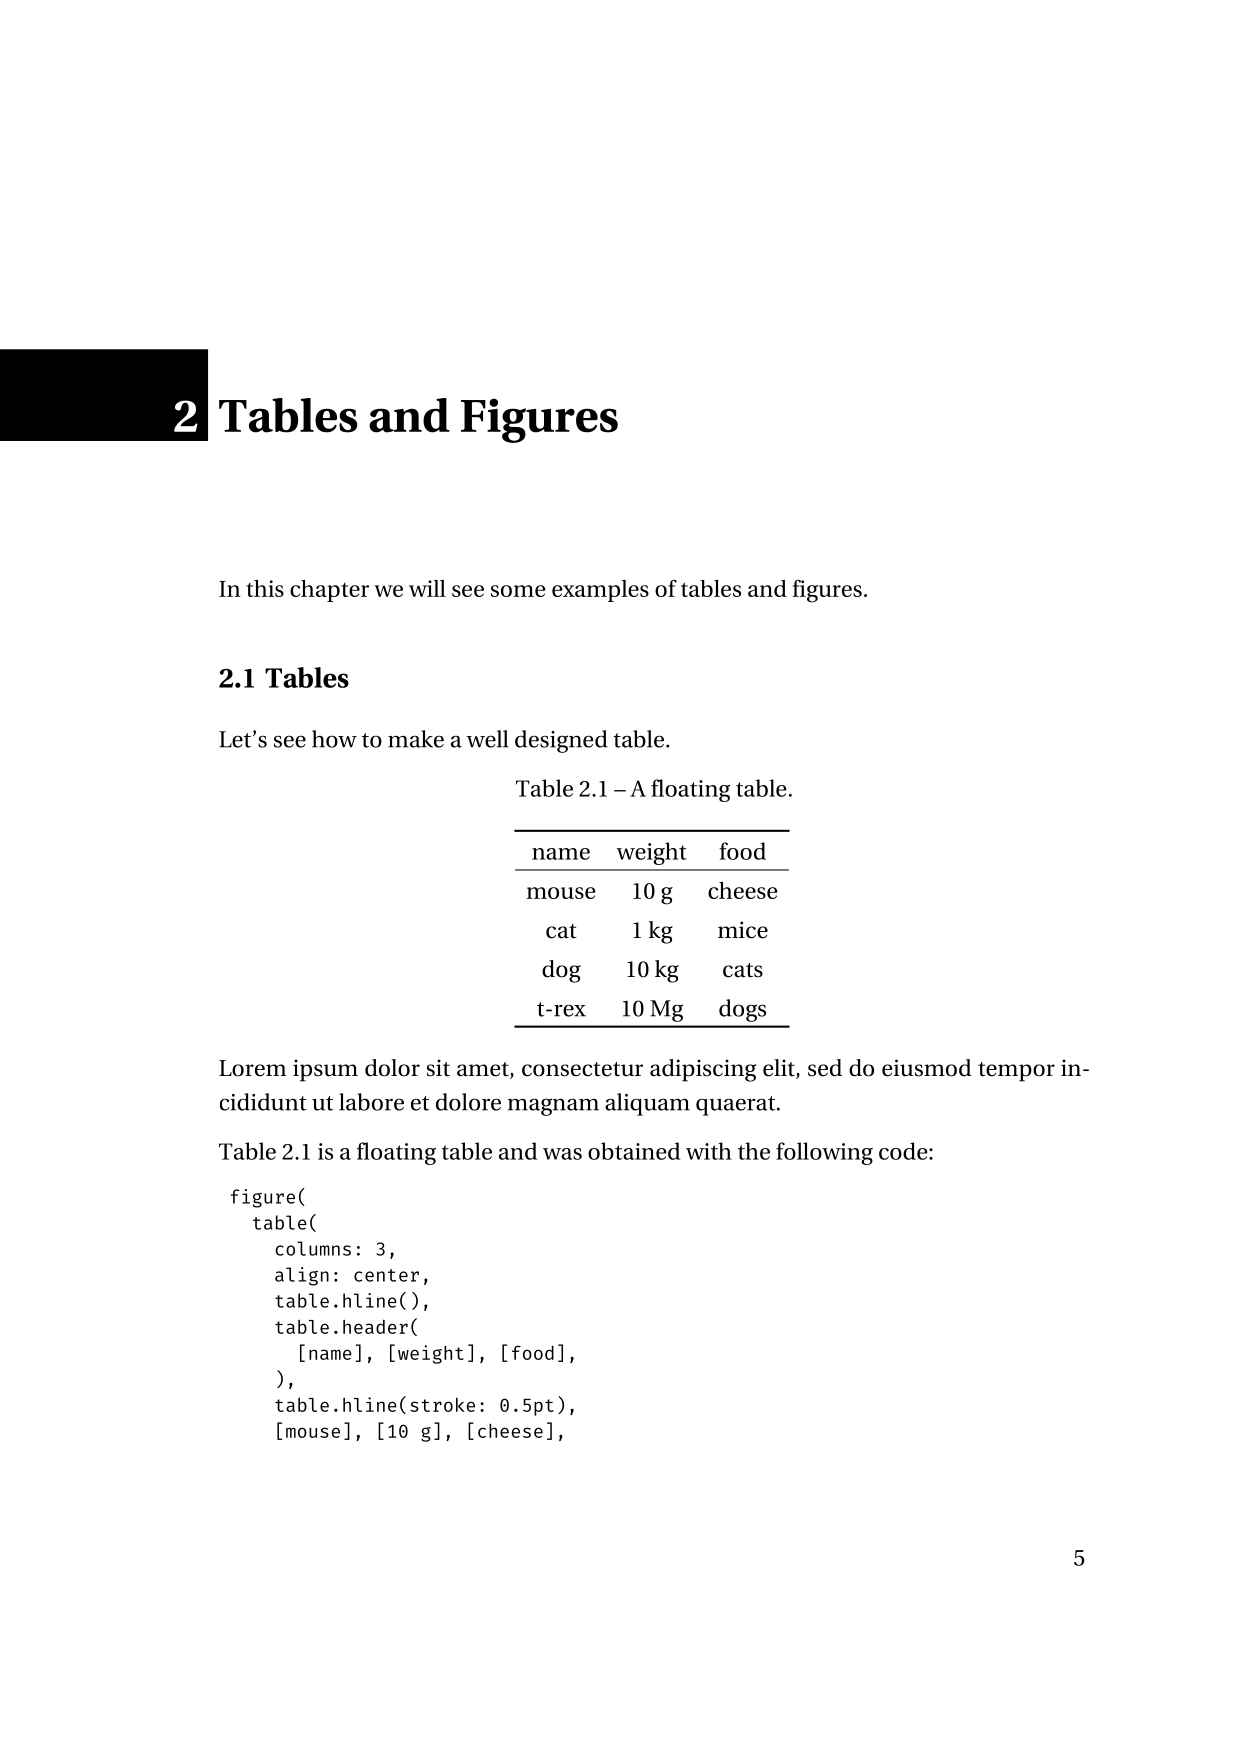 tables_and_figures.png